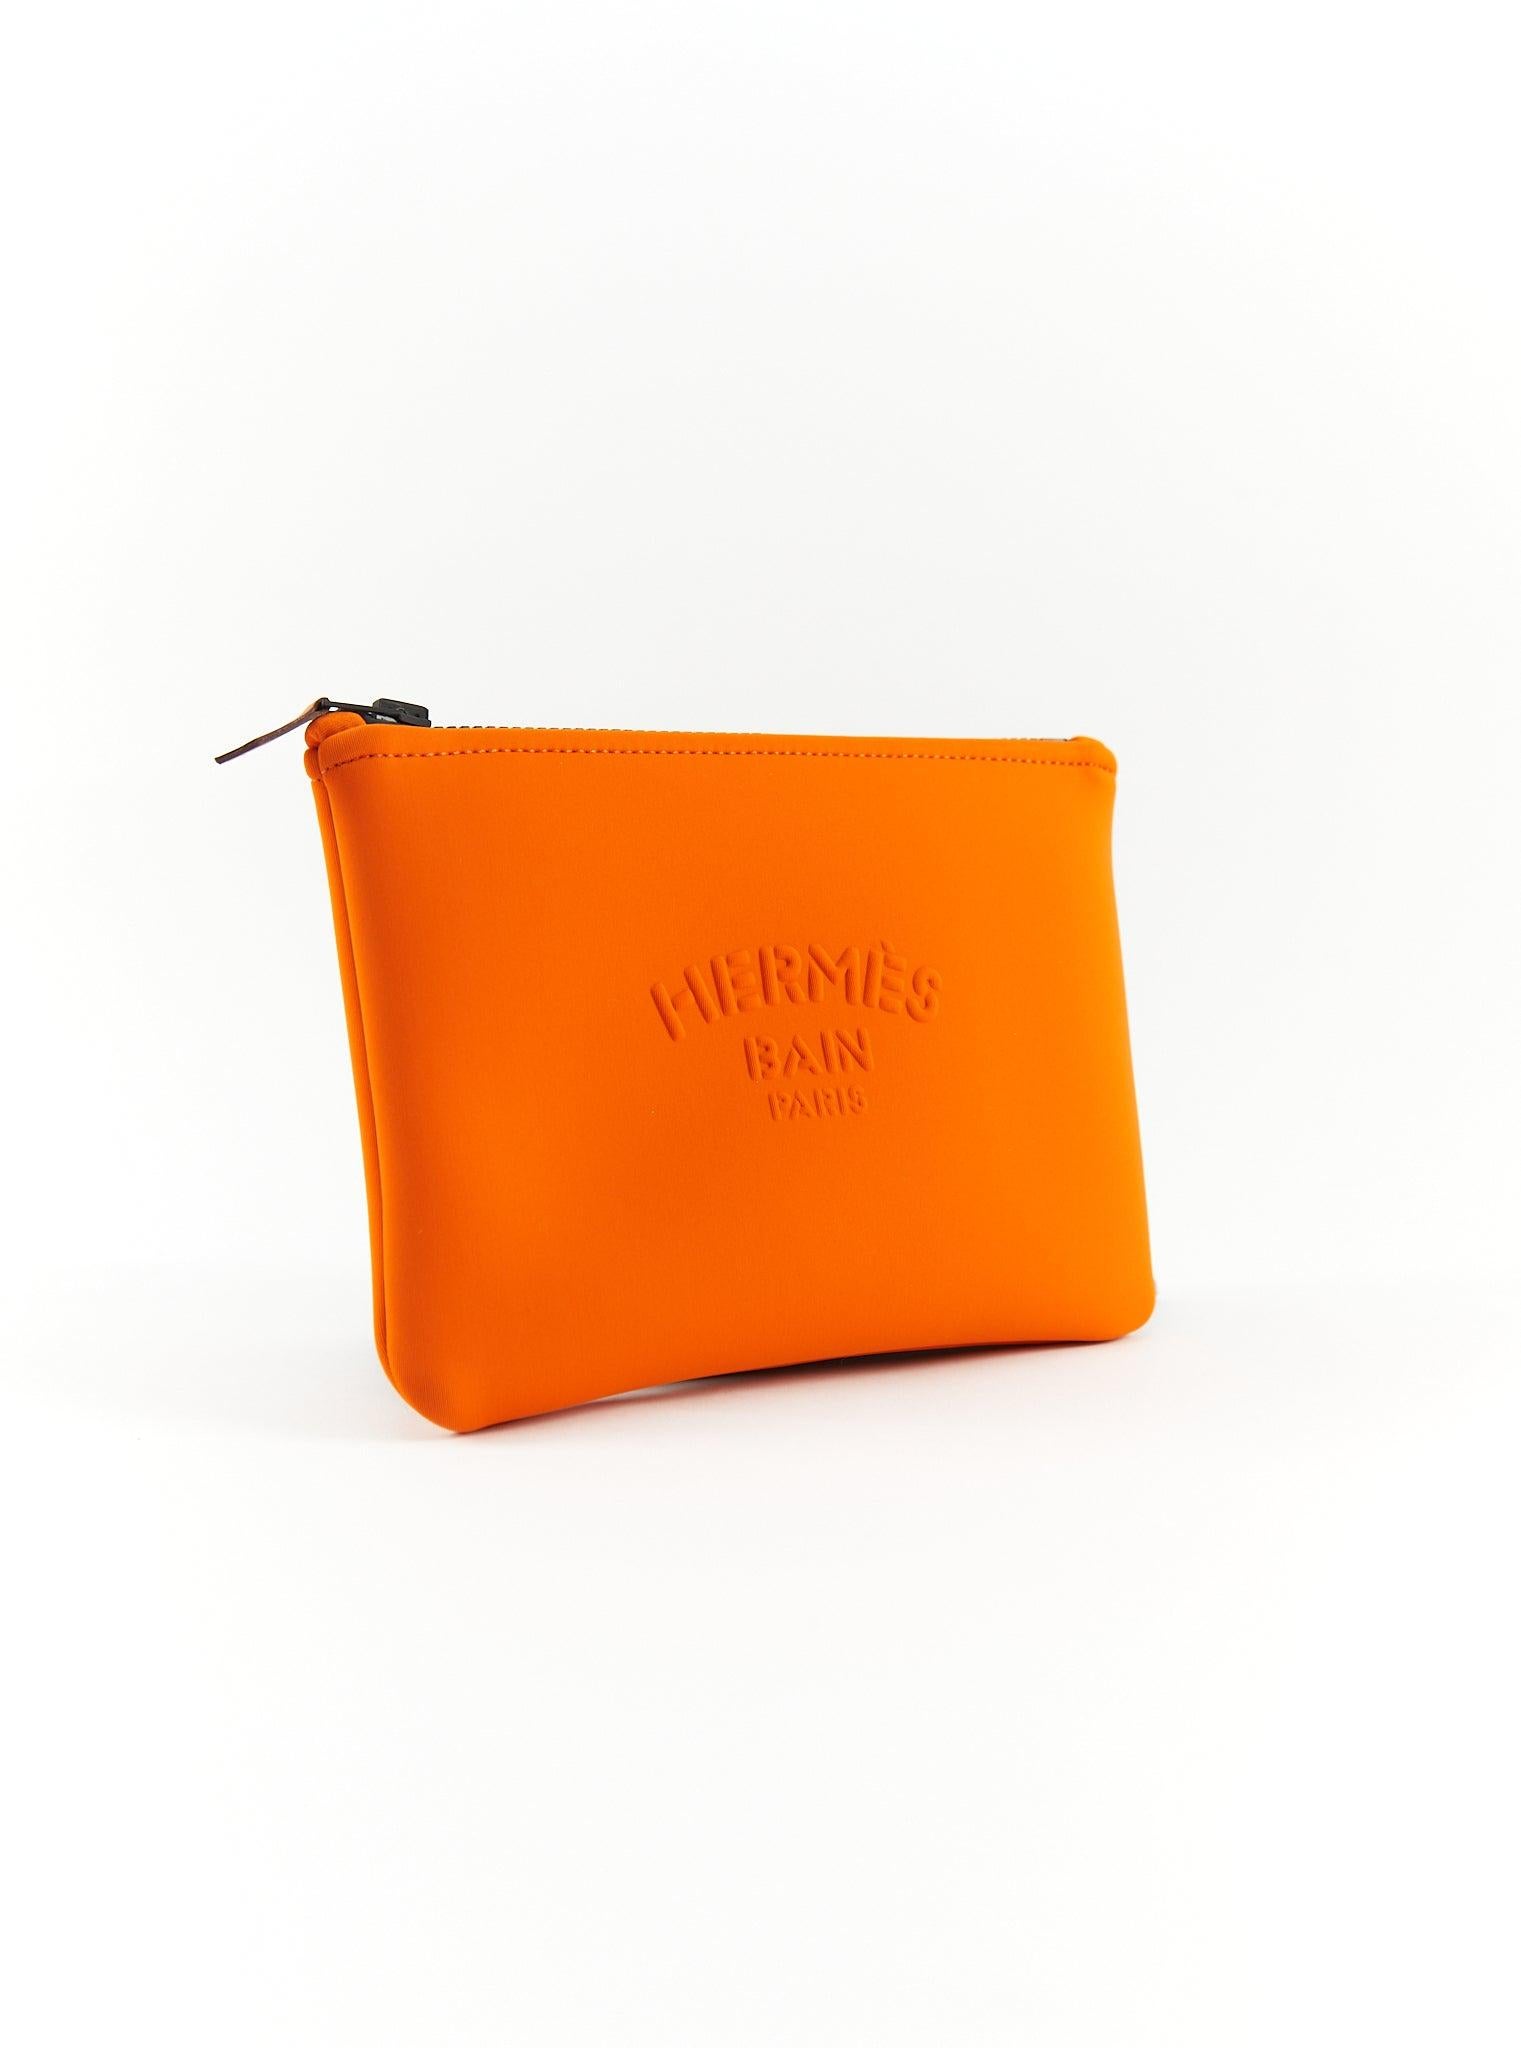 Hermès Neobain Case in Orange

Zip closure with leather pull tab 

80% polyamide and 20% elastane

Small Model 

Dimensions: L 21 x H 15 cm

Made in France